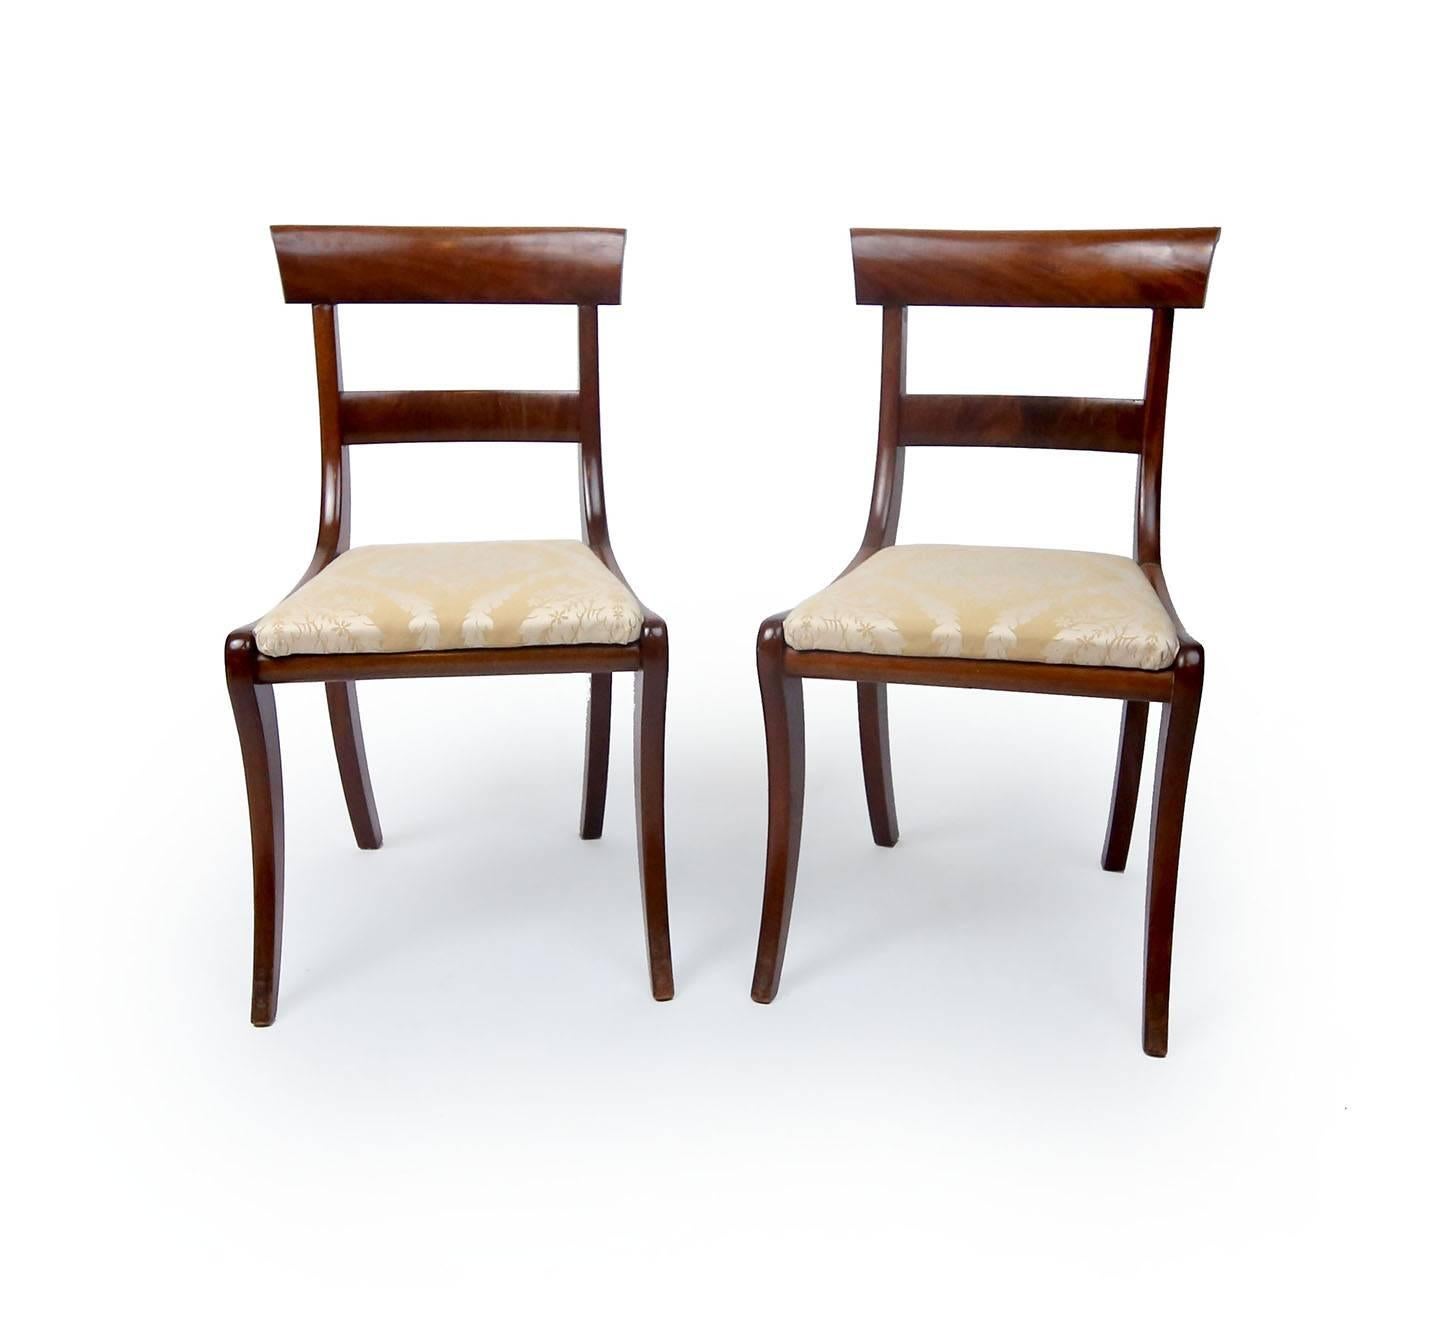 Two handsome mahogany chairs, with molded crest rail, saber legs and Classic Klismos shape. Upholstered in a gold and cream damask, England, early 20th century.